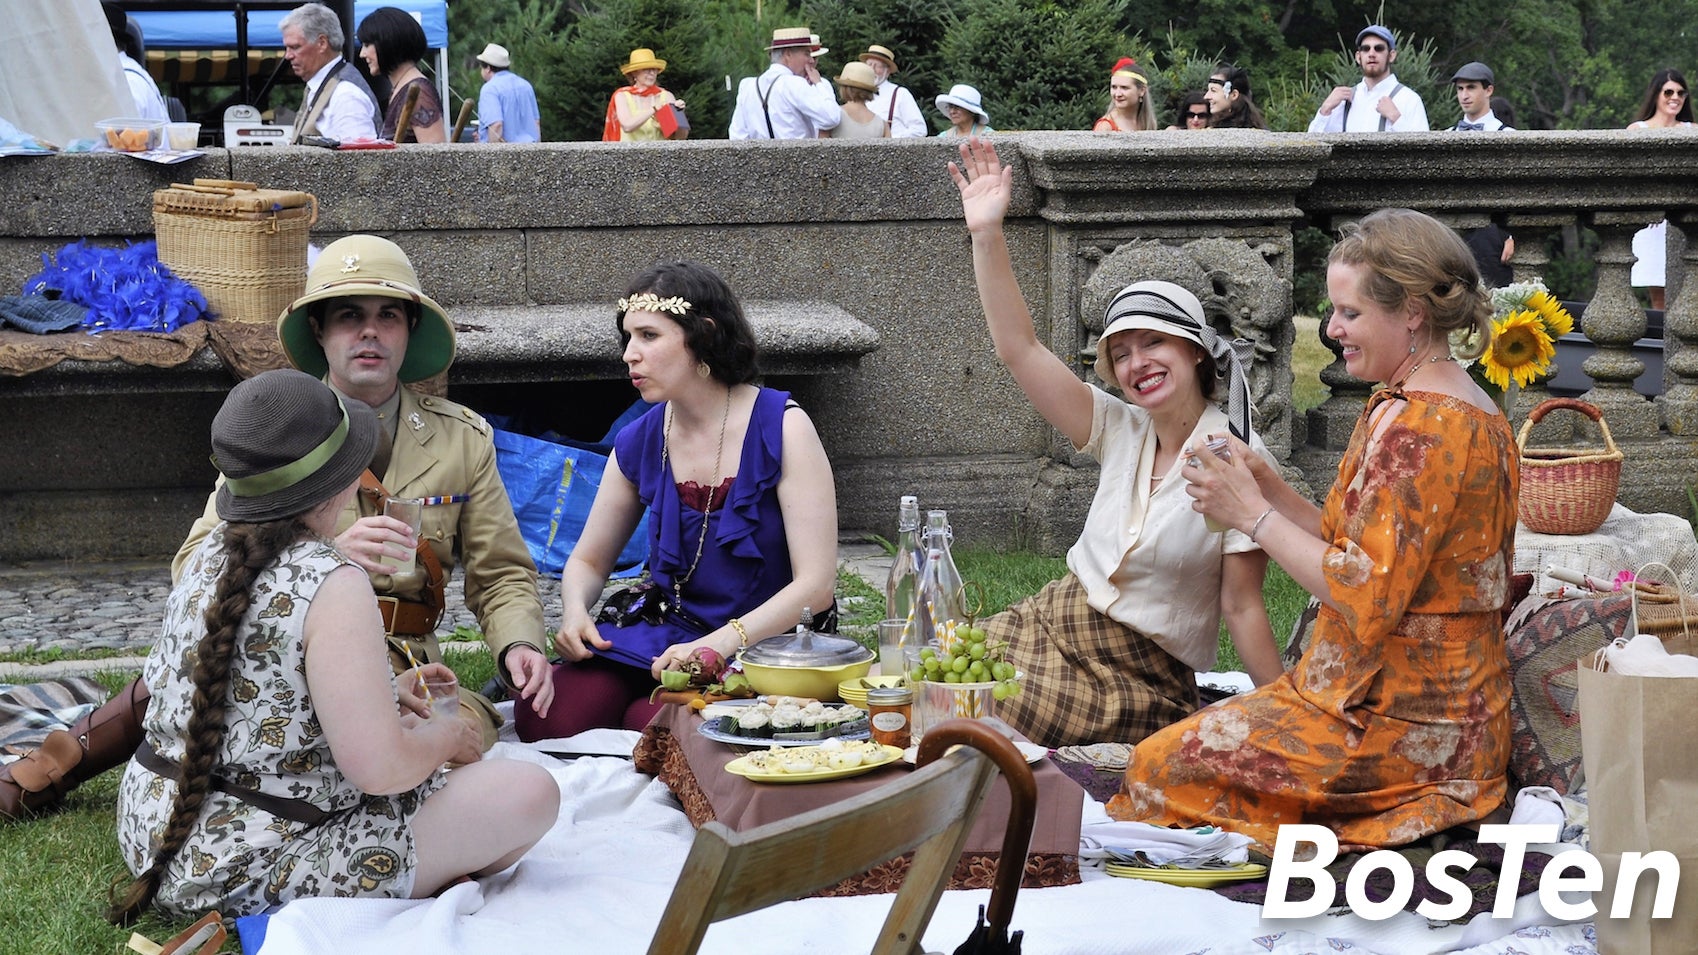 The Roaring Twenties Lawn Party at Castle Hill at the Crane Estate.